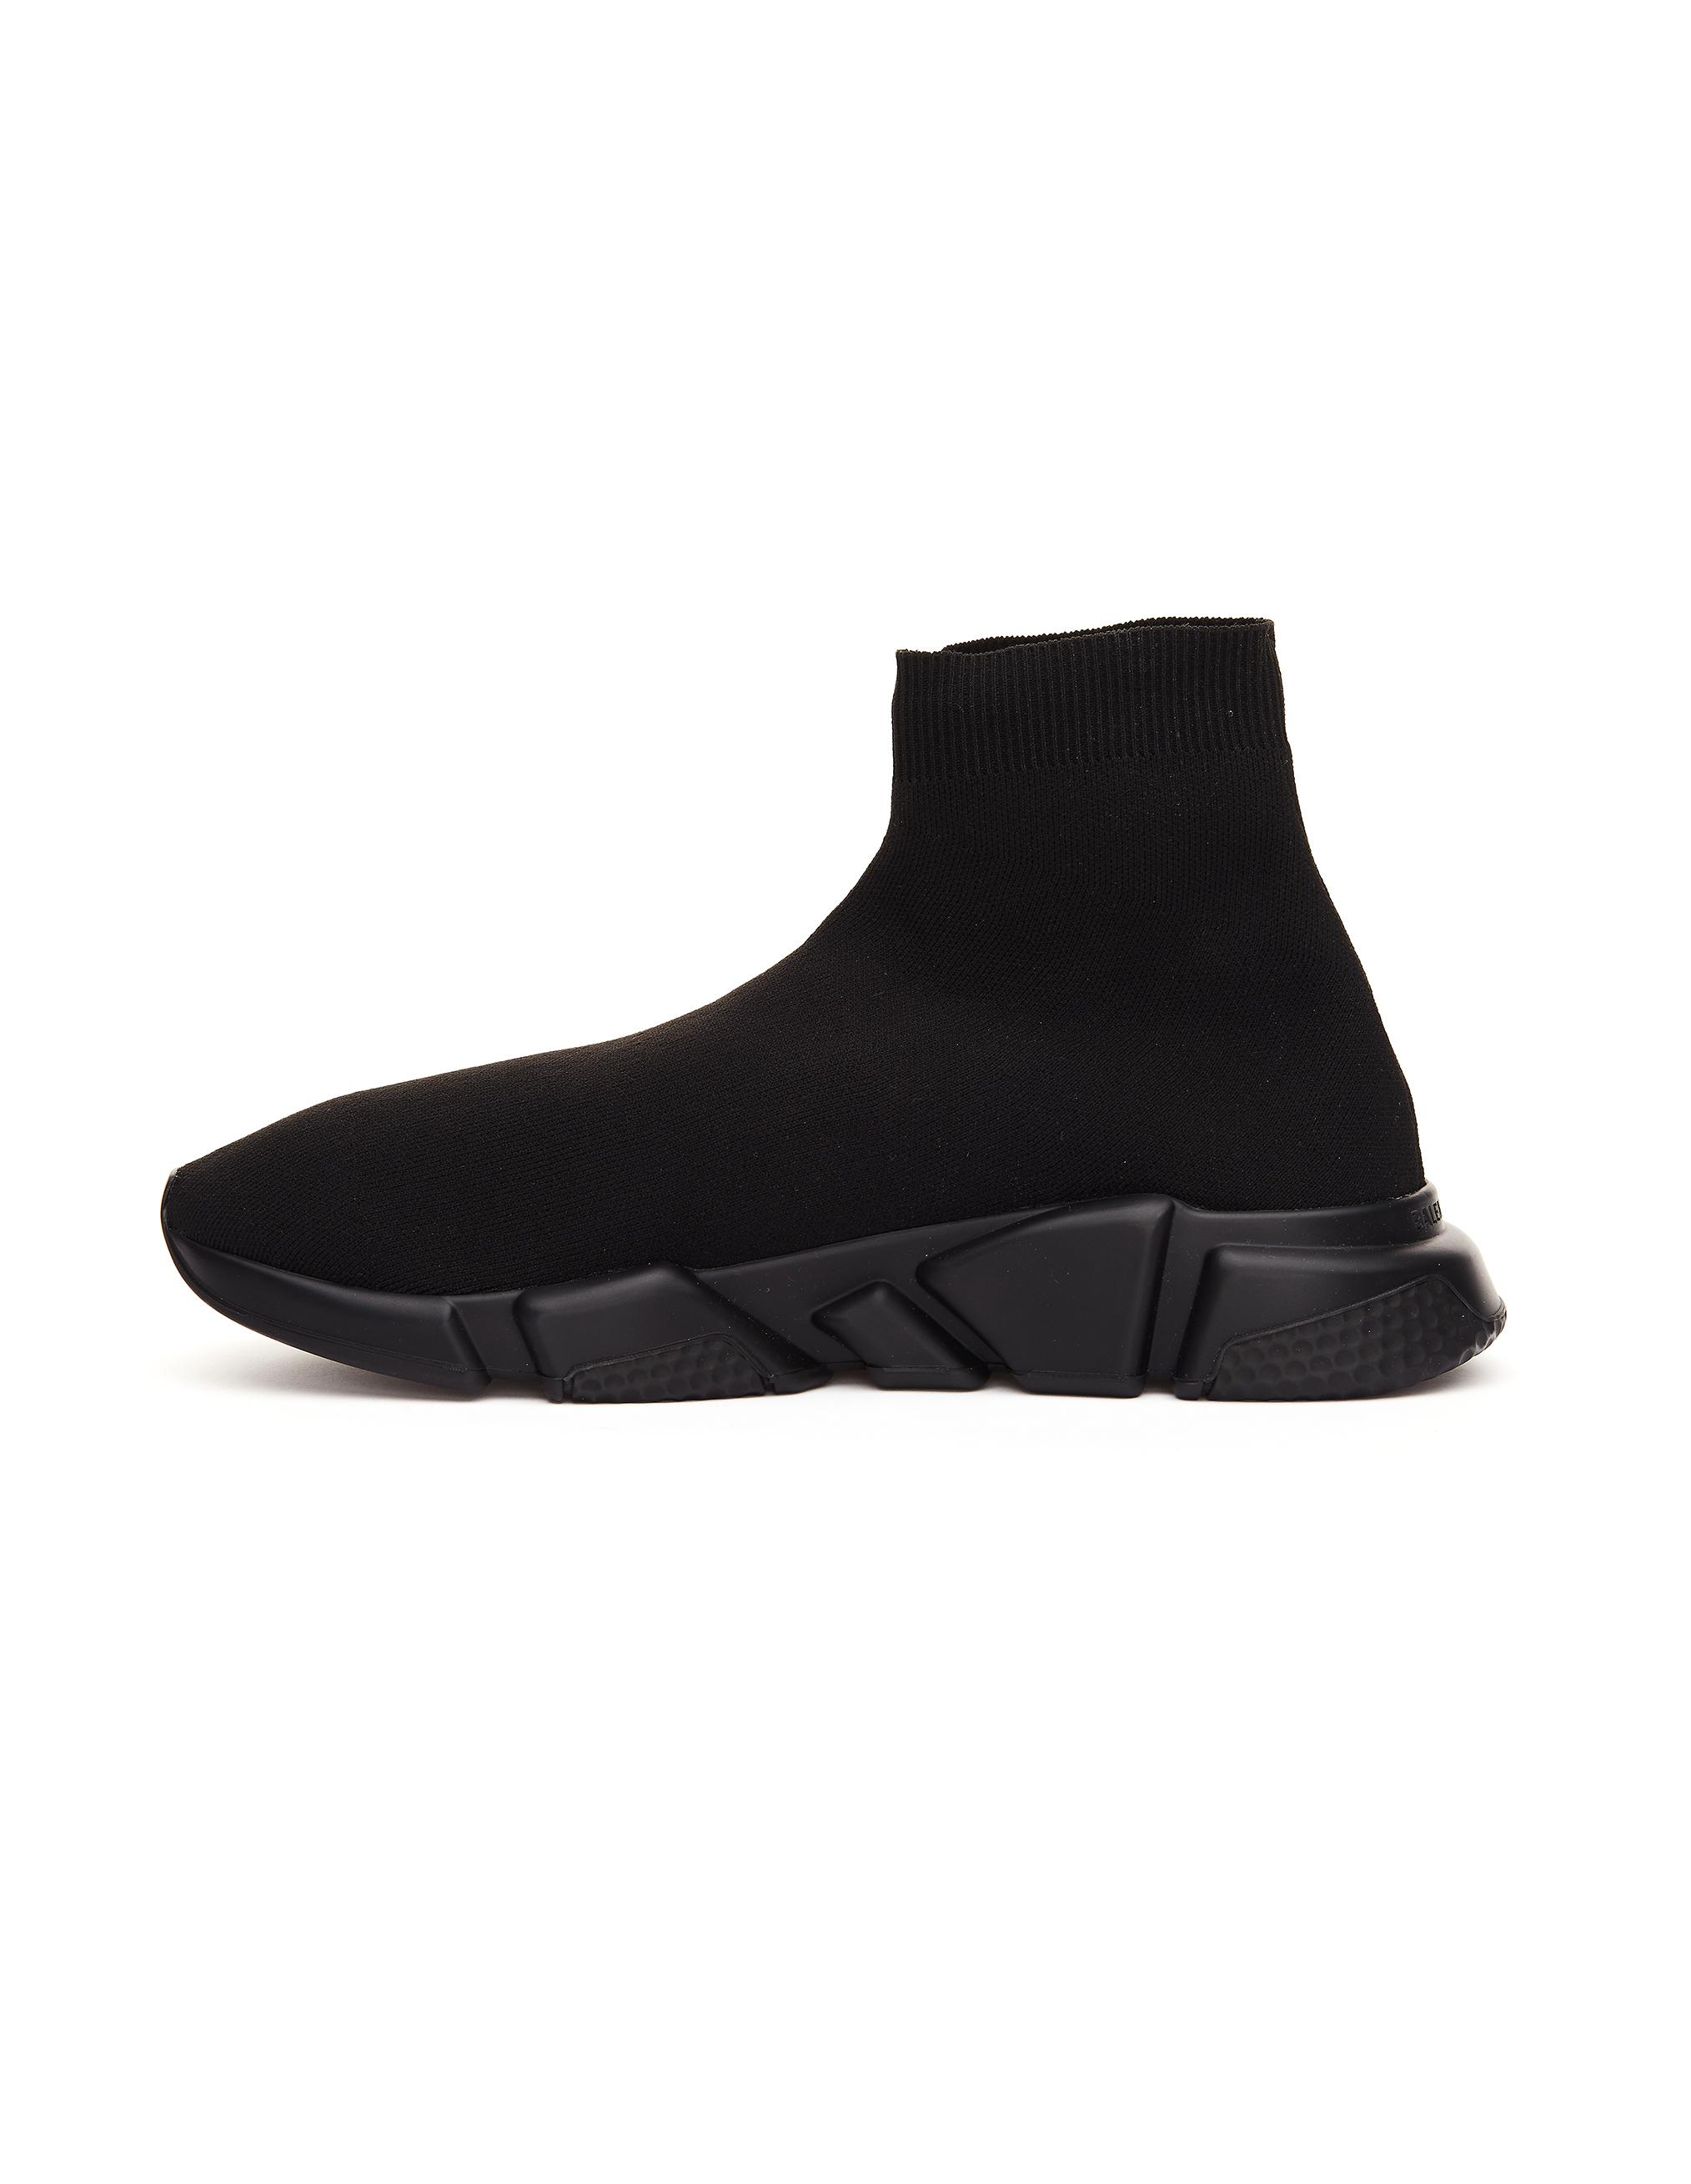 Balenciaga Rubber Speed Trainers in Black for Men - Save 8% - Lyst